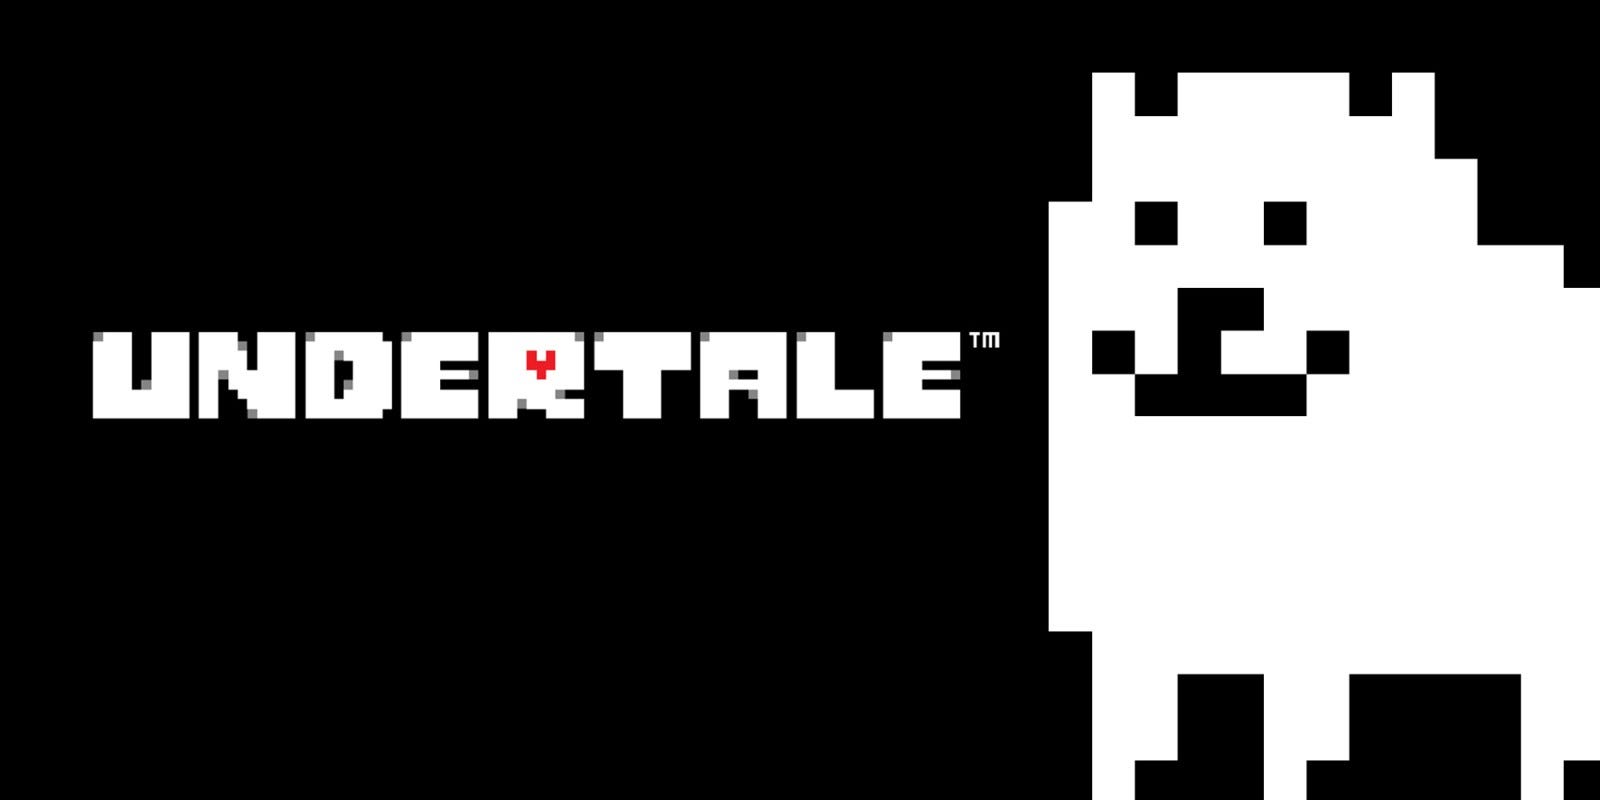 How are Undertale's attacks programmed/stored? What is in these files? I  want to examine this for my personal programming uses. - Quora